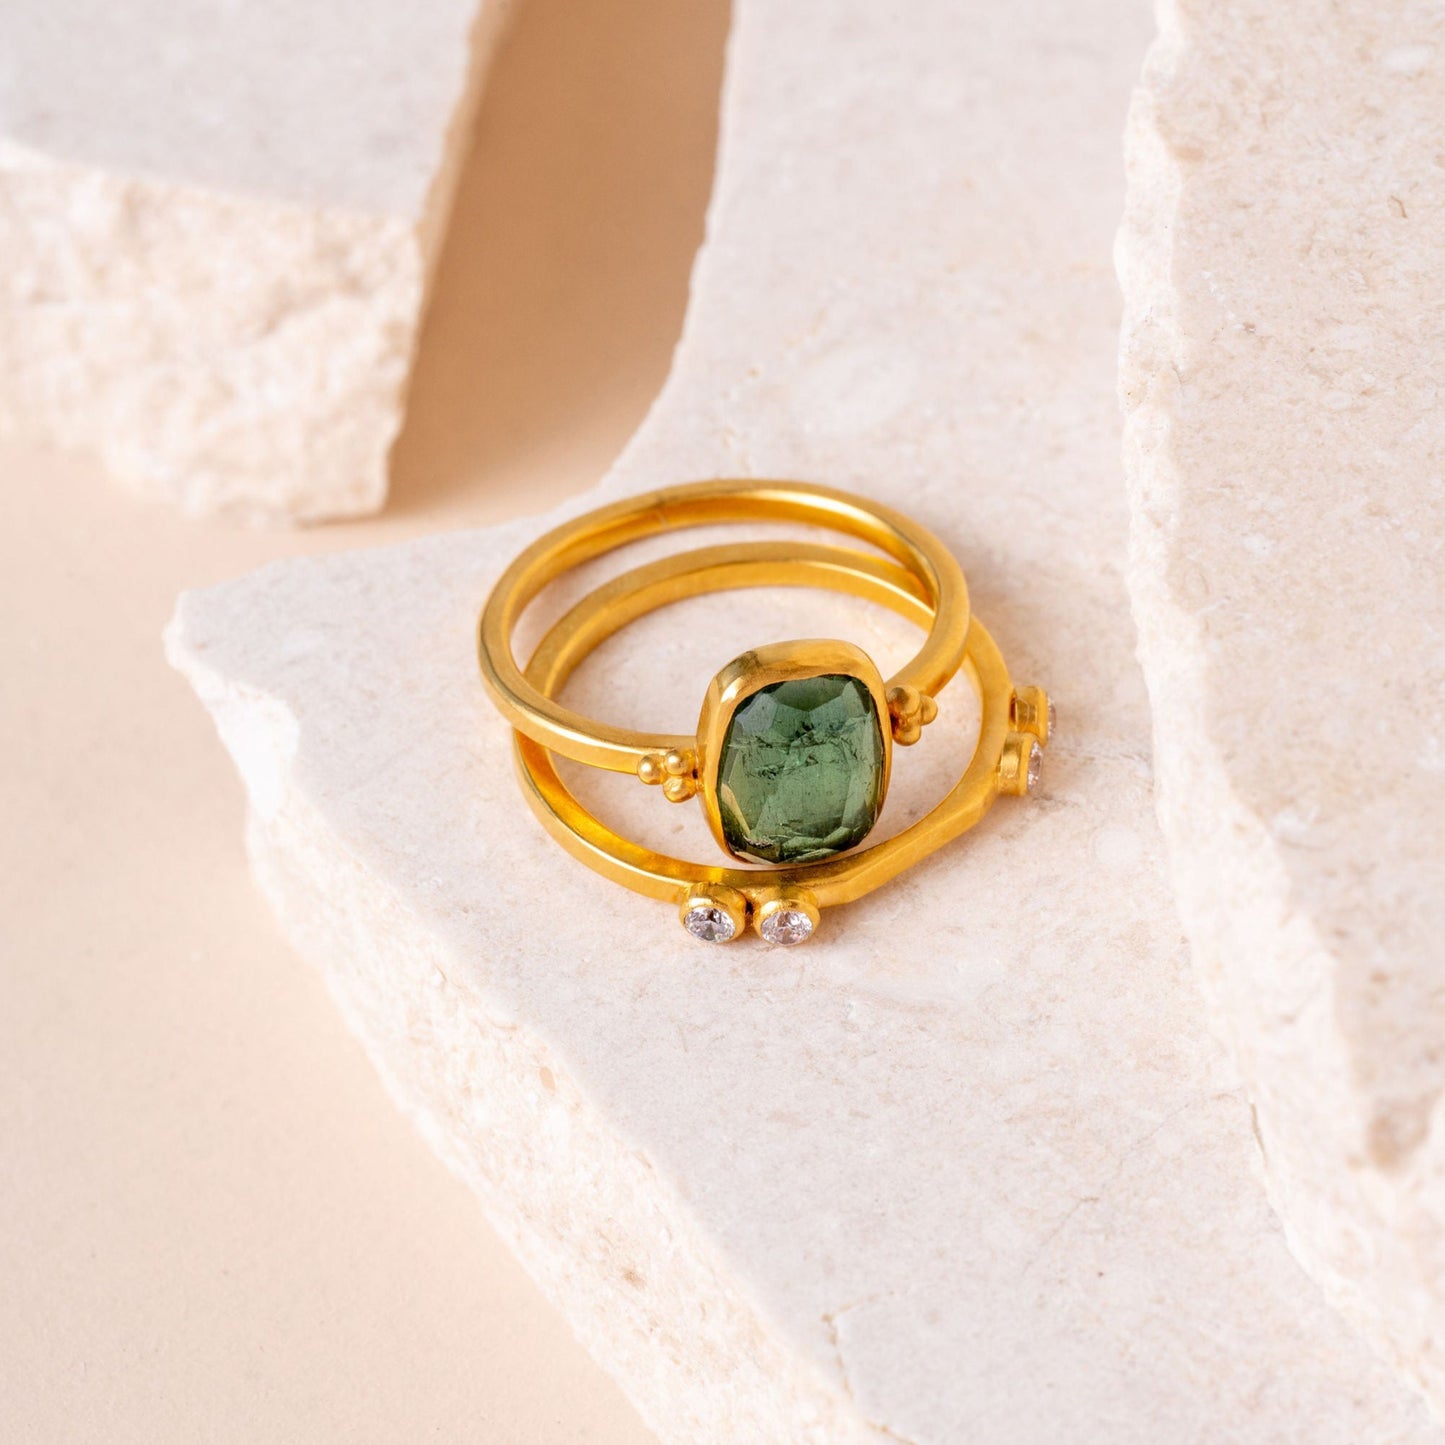 A captivating ensemble of handcrafted gold rings, showcasing intricate granulation details and featuring stunning forest green tourmaline gemstones